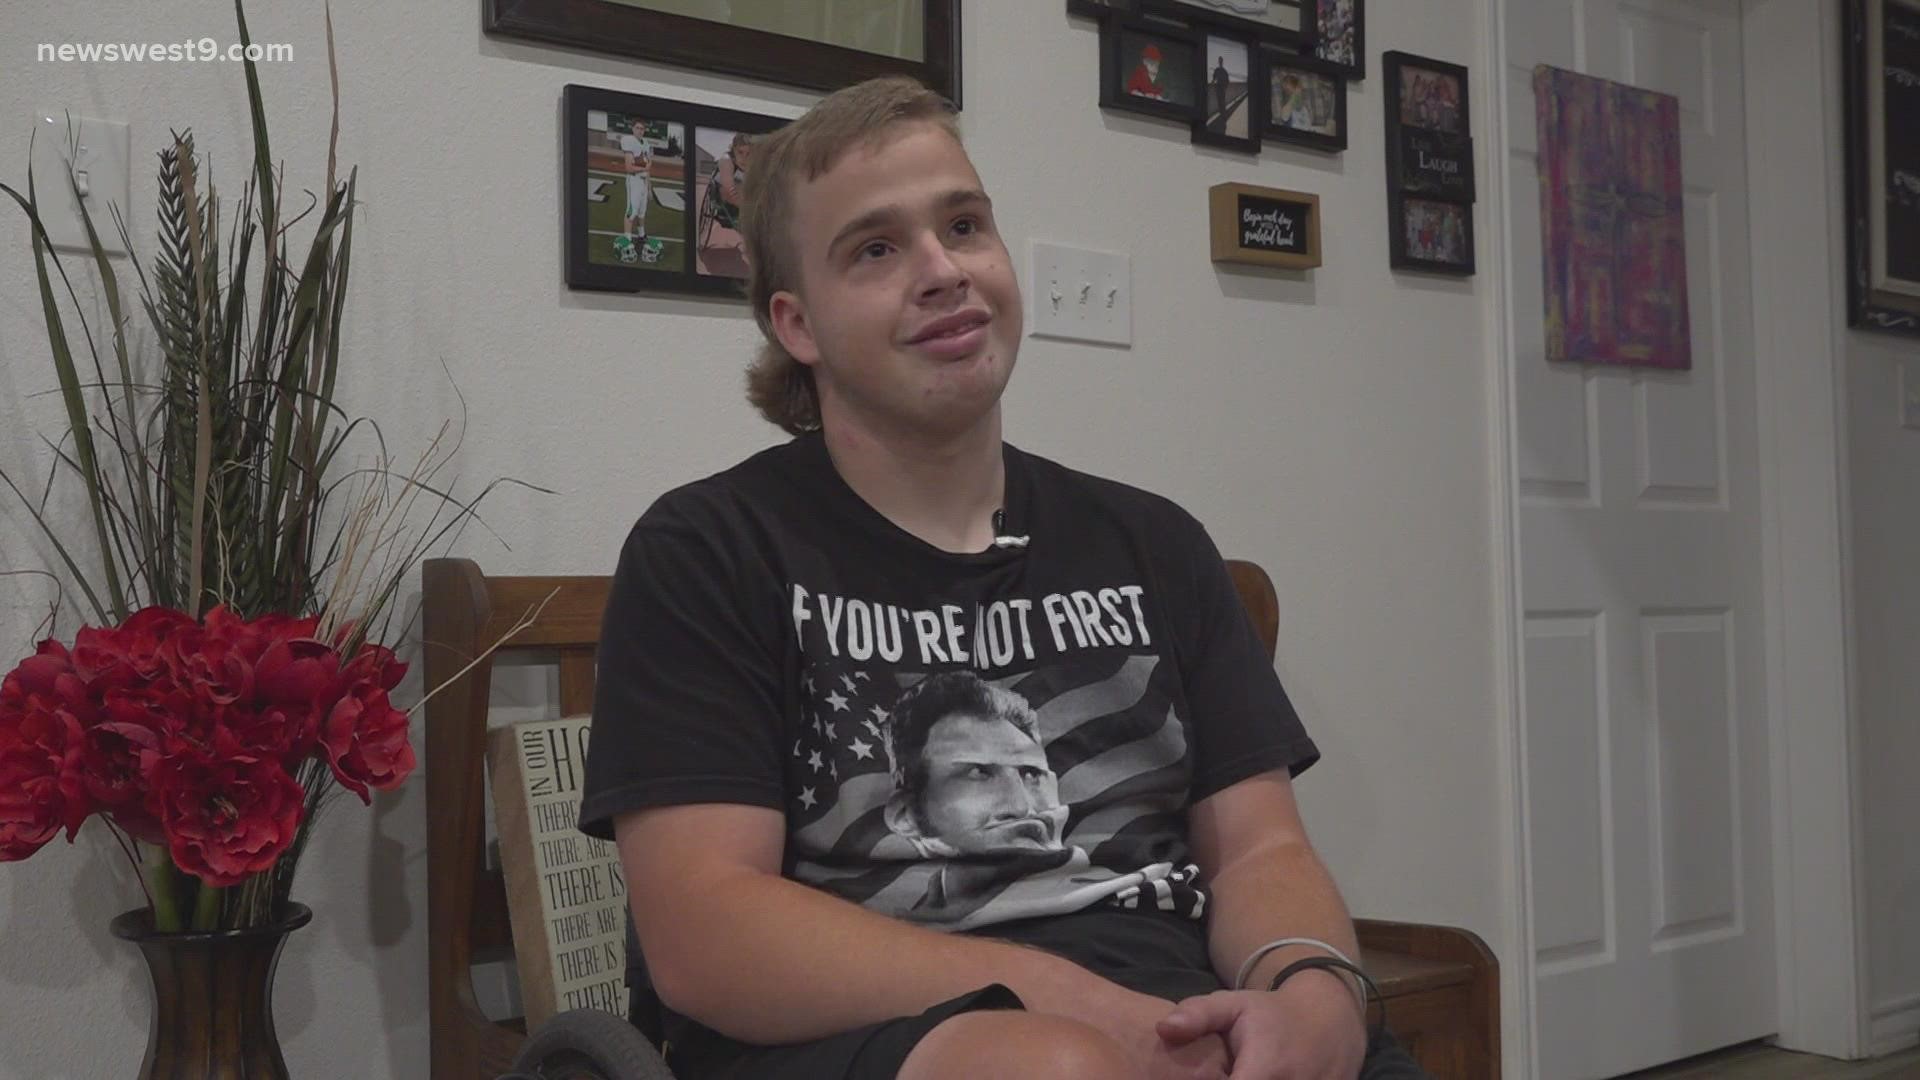 Zachary Carter, who lives with spina bifida, competes in track and field and has played football as well.